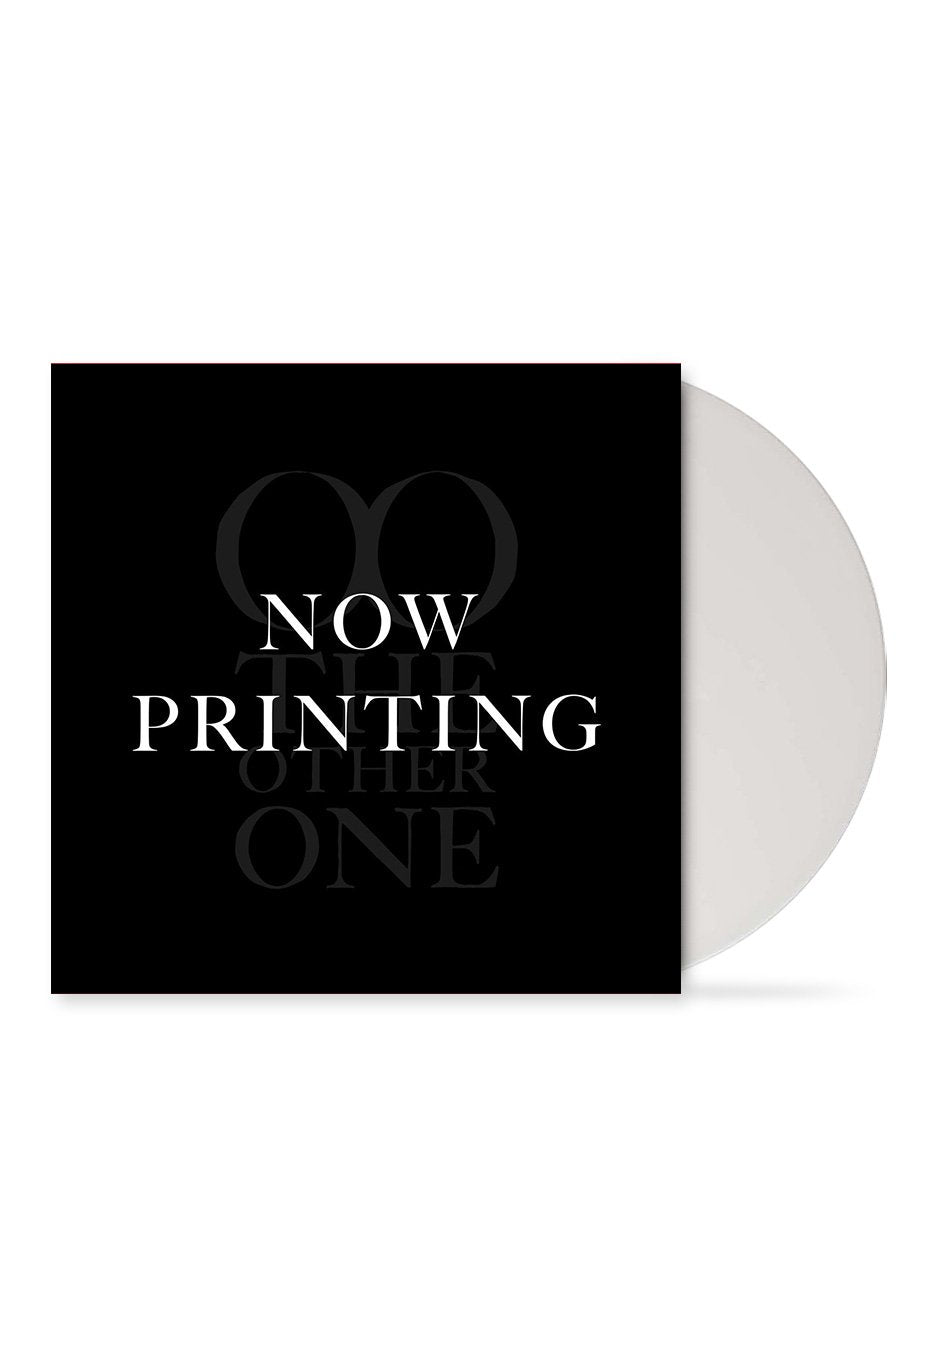 Babymetal - The Other One Ltd. White - Colored Vinyl